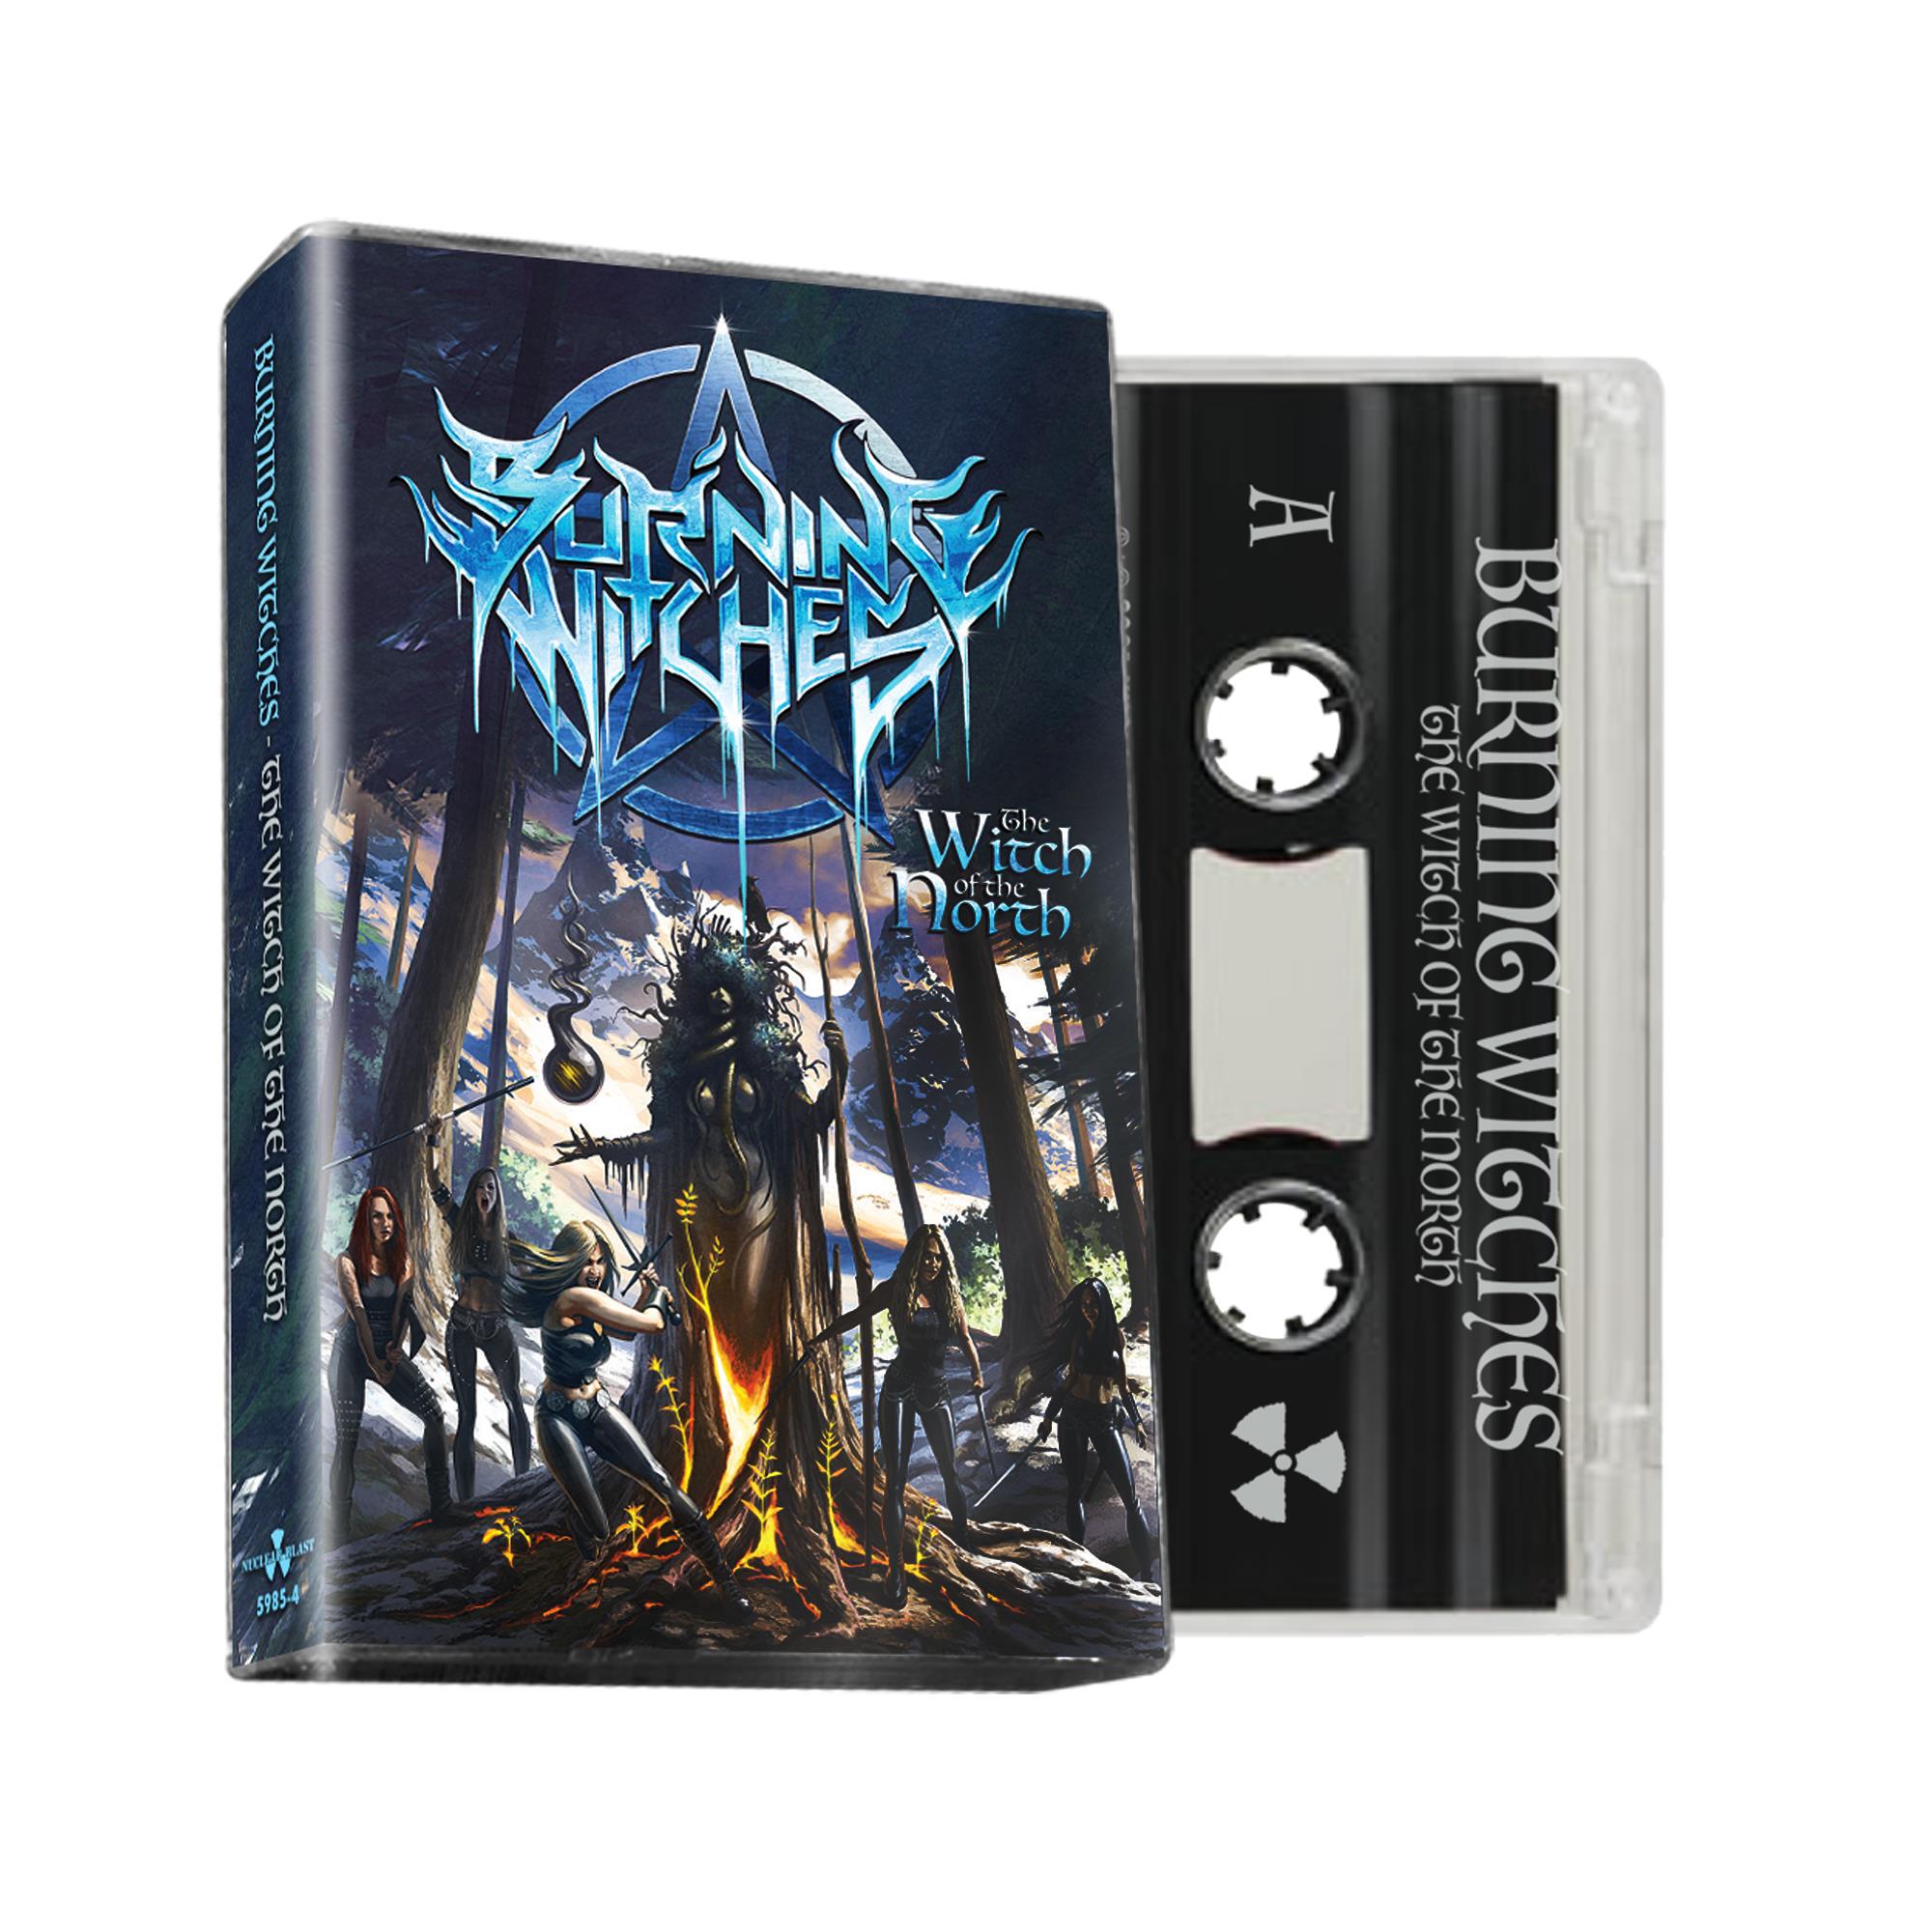 The Witch of the North Cassette